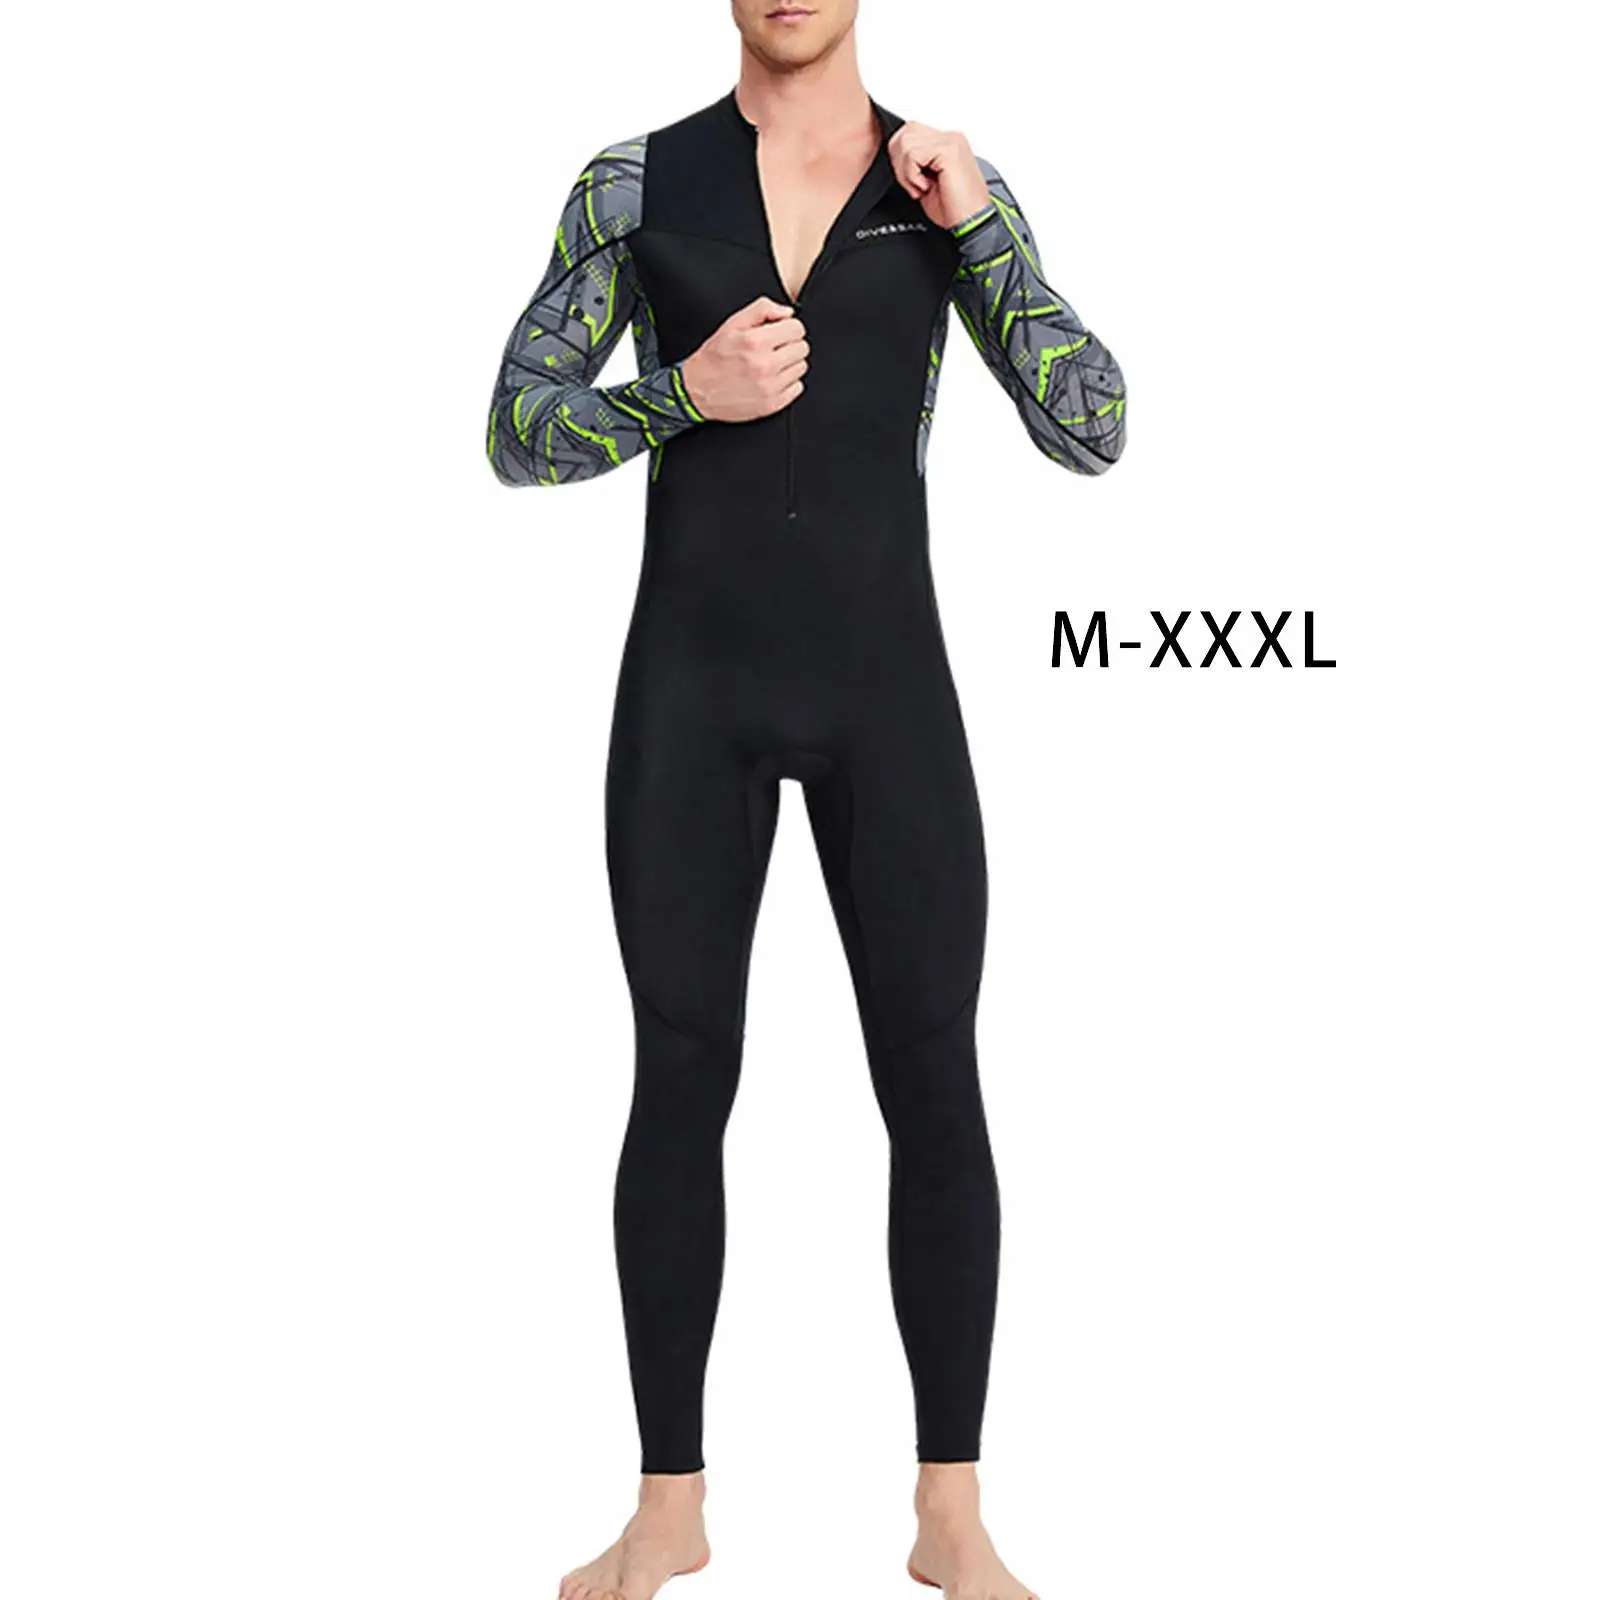 Mens Neoprene Wetsuit, Full Body Diving Suit Front Zip Wetsuit for Diving Snorkeling Surfing Swimming